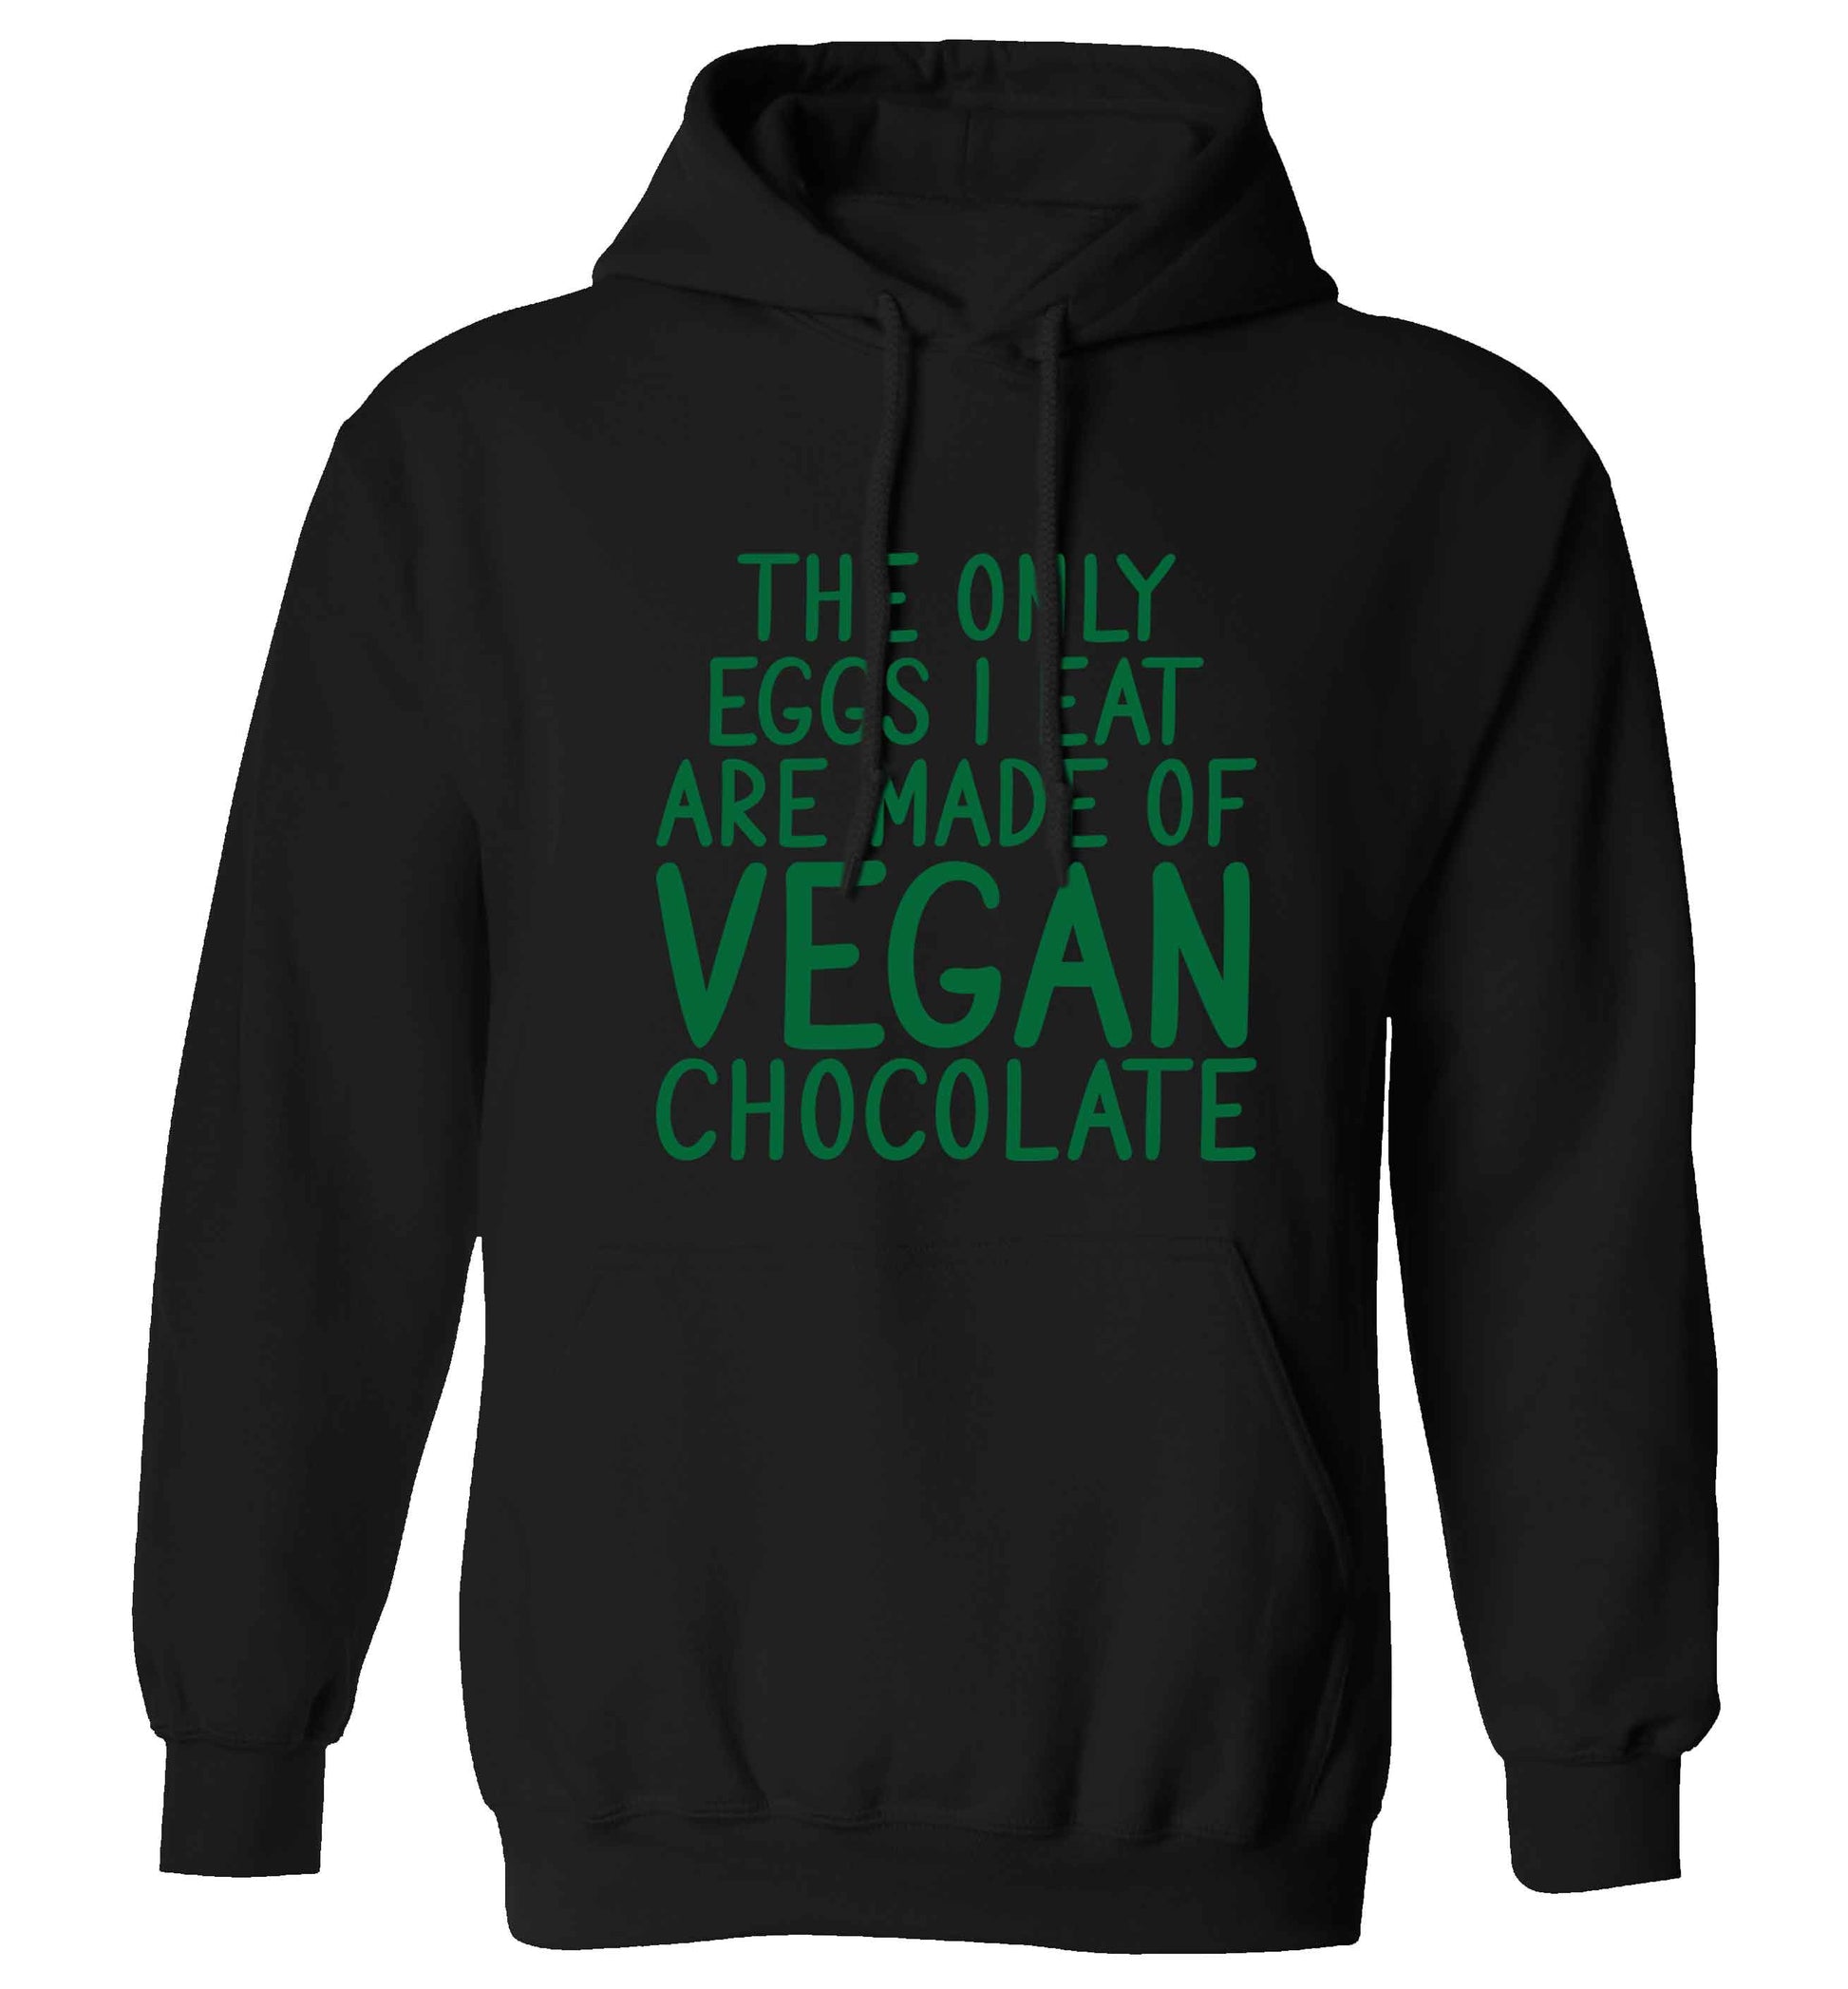 The only eggs I eat are made of vegan chocolate adults unisex black hoodie 2XL